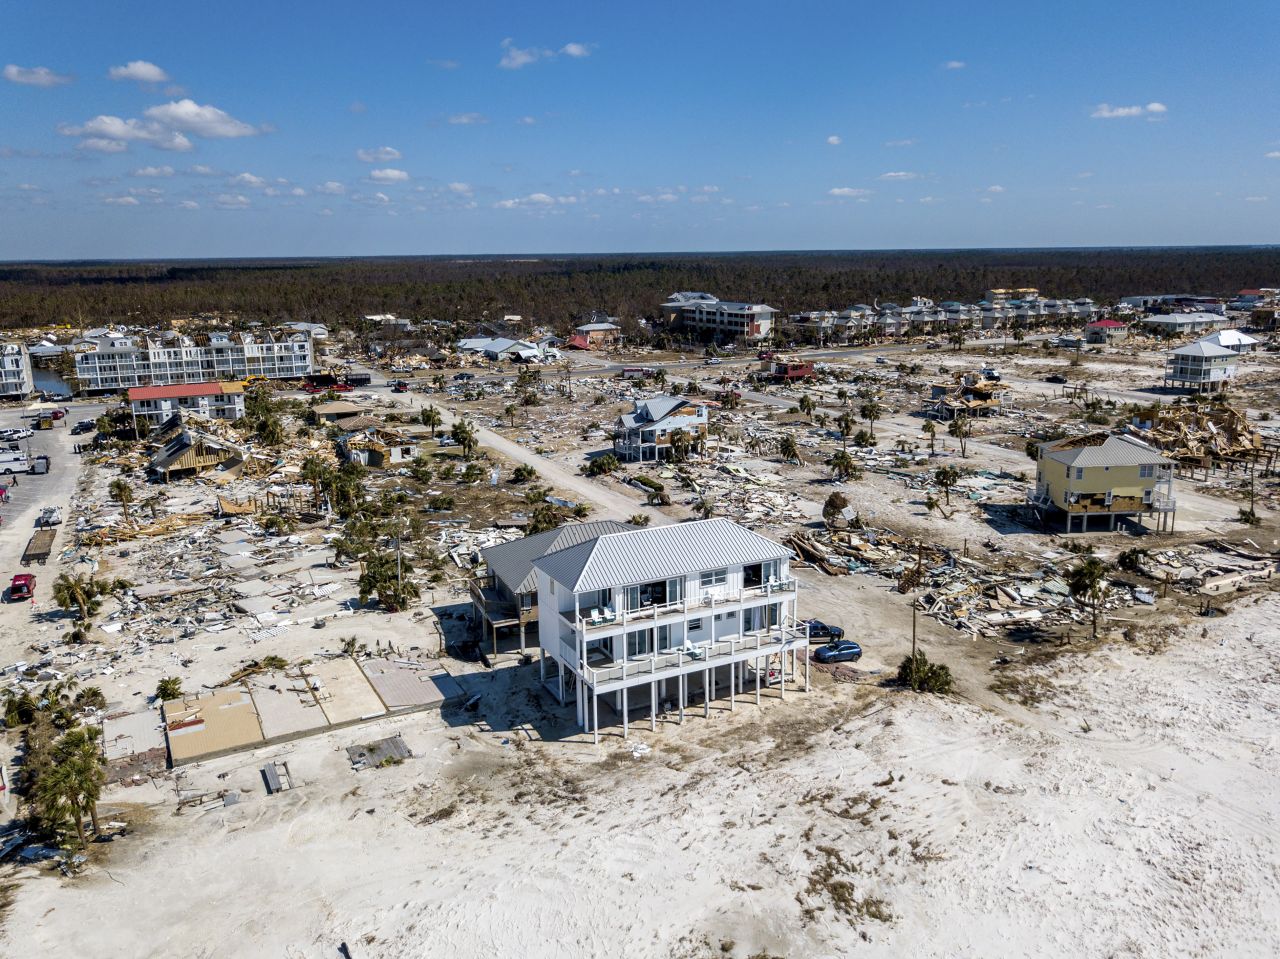 The home Russell King and his nephew Lebron Lackey built to withstand 250-mph winds <a href="https://www.cnn.com/2018/10/15/us/mexico-beach-house-hurricane-trnd/index.html" target="_blank">in Mexico Beach</a>, Florida, is seen on Sunday, October 14, after Hurricane Michael. <a href="https://www.cnn.com/2018/10/10/weather/gallery/hurricane-michael/index.html" target="_blank">In pictures: Hurricane Michael's trail of destruction</a>